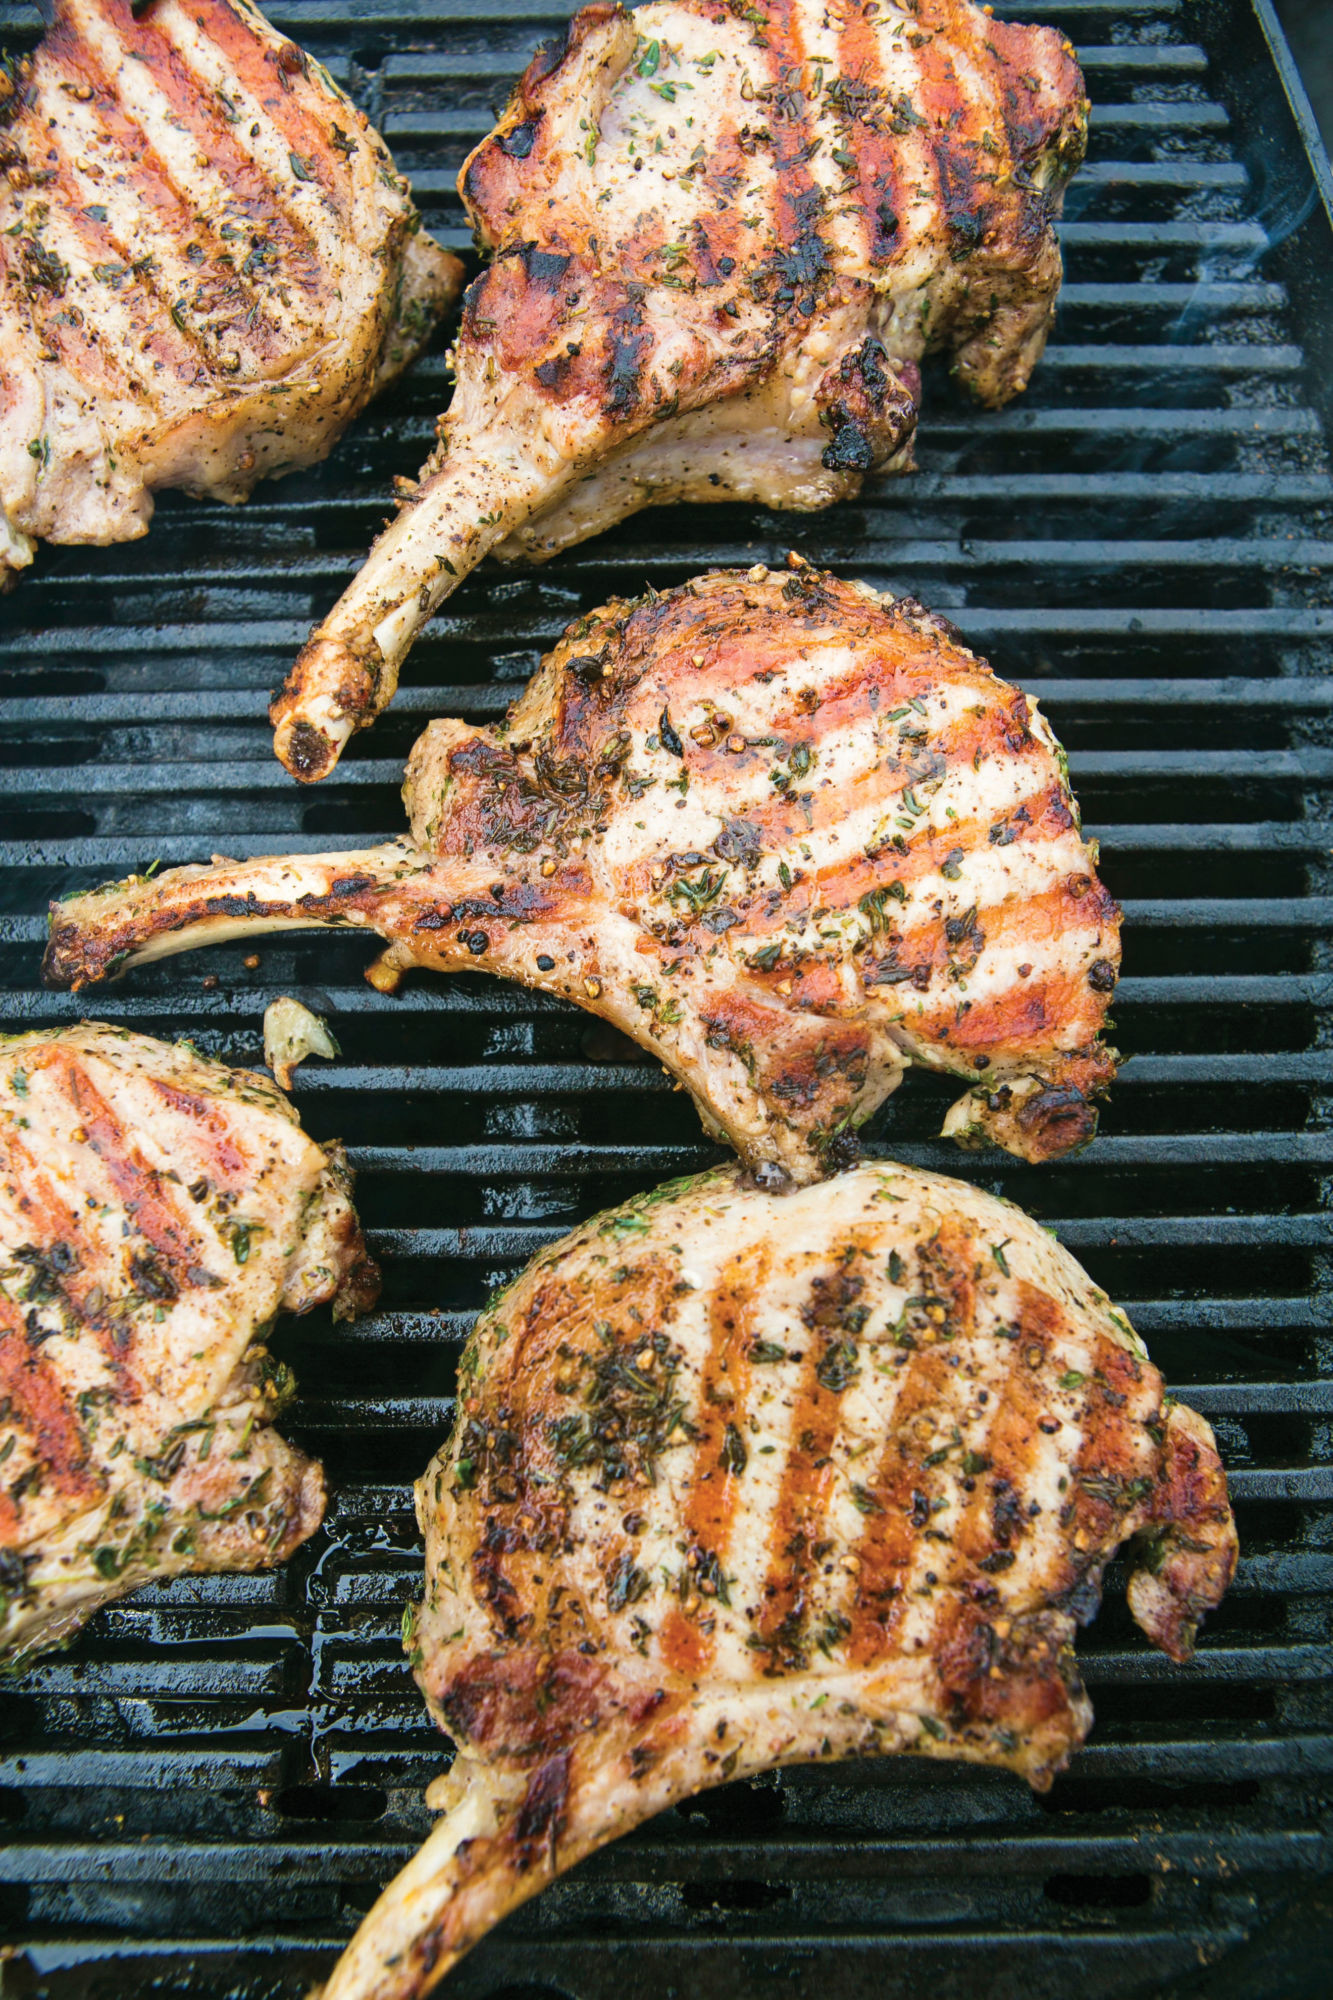 Grilled Smoked Pork Chops
 Grilled Pork Chops with Fresh Herbs and Smoked Garlic